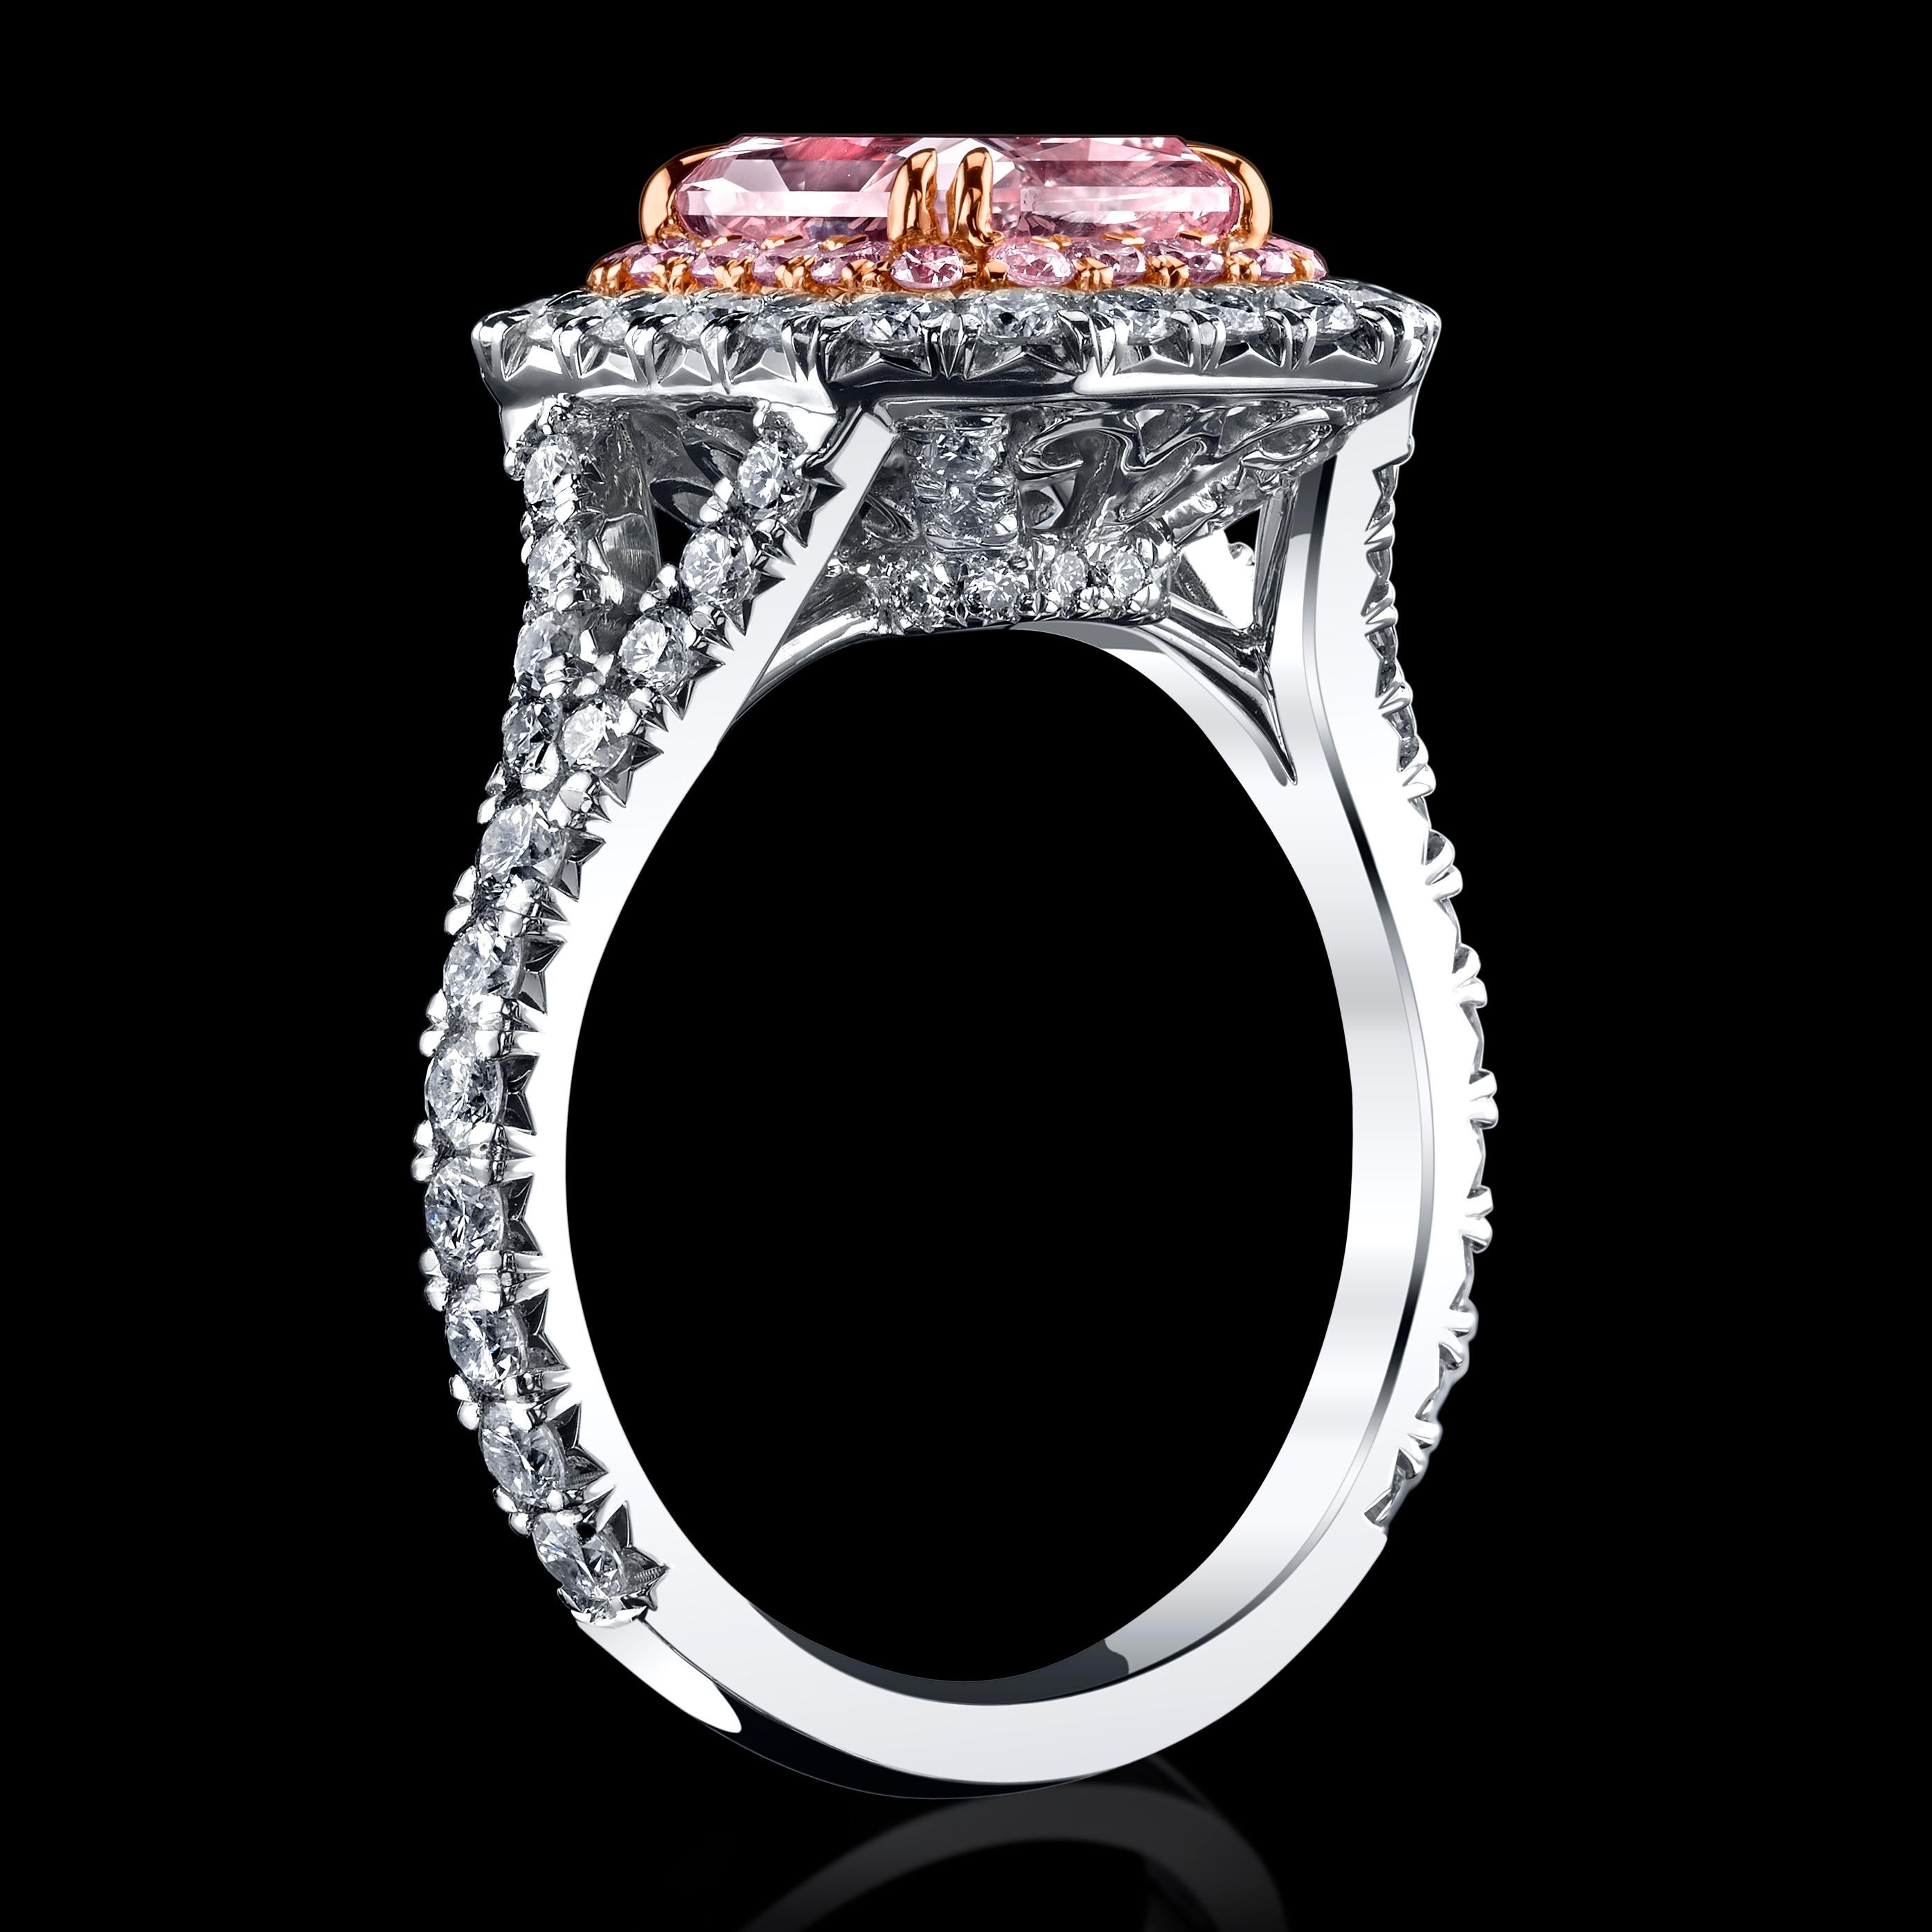 The shade of diamond color mimics a strong Californian sunset. 

A lovely 2.05ct Radiant Fancy Light Orangy Pink SI2 Natural diamond halo ring set in platinum & 18K White Gold with an array of beautiful pink and colorless natural diamonds totaling